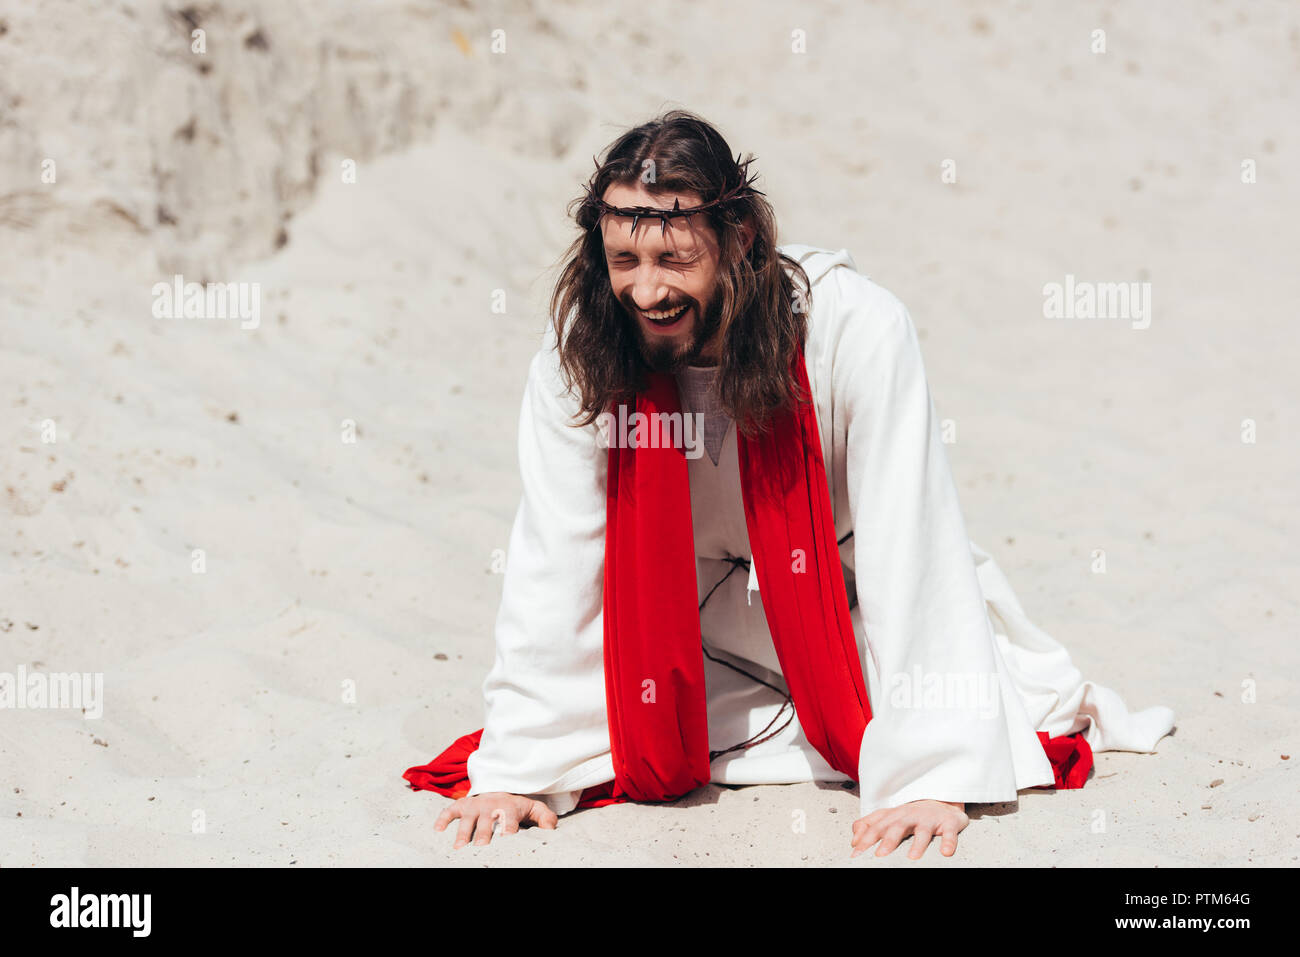 laughing Jesus in robe, red sash and crown of thorns standing on knees and touching sand with hands in desert Stock Photo